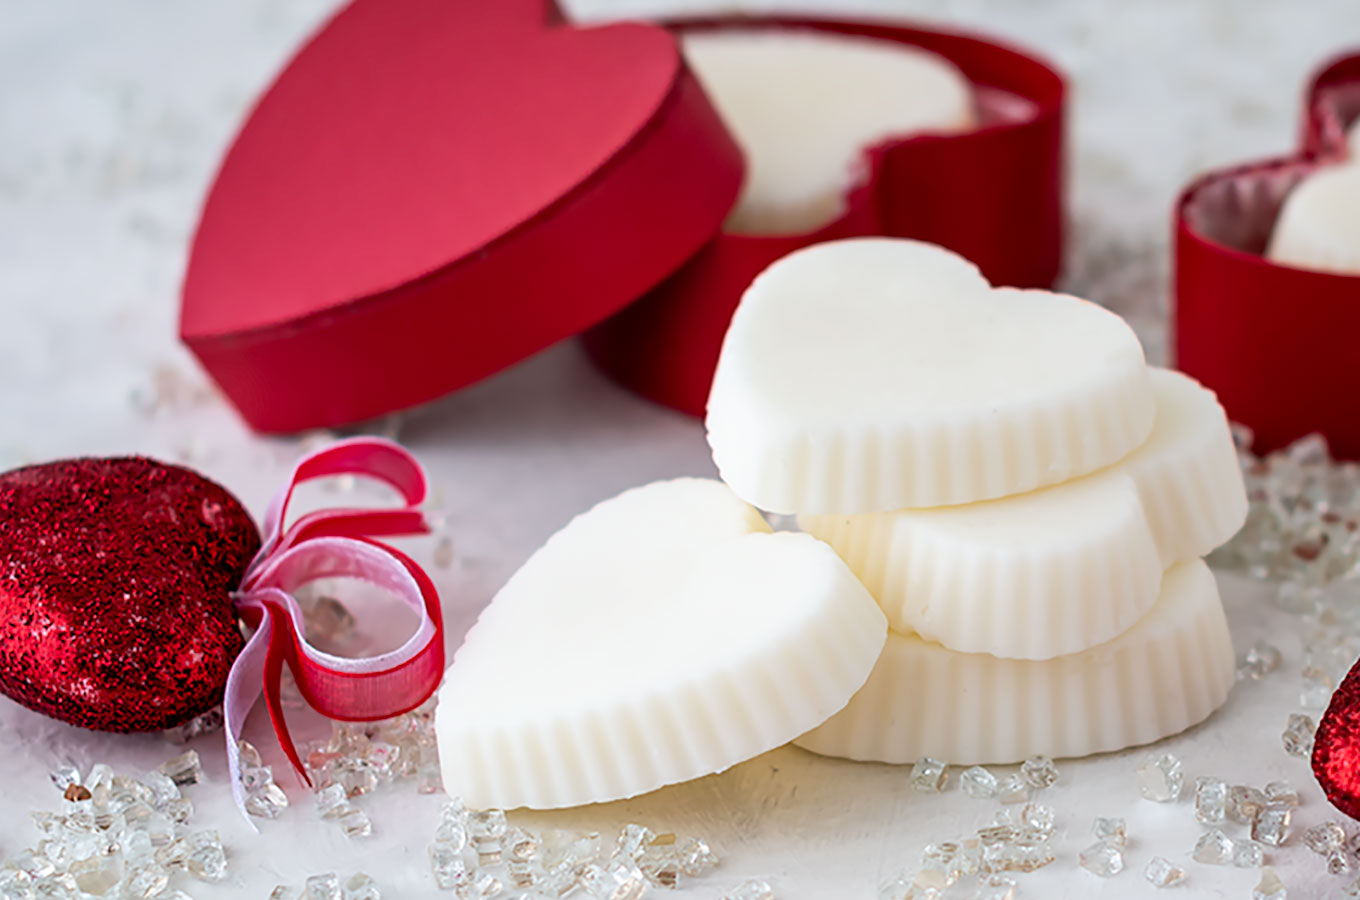 Stack of heart shaped lotion bars